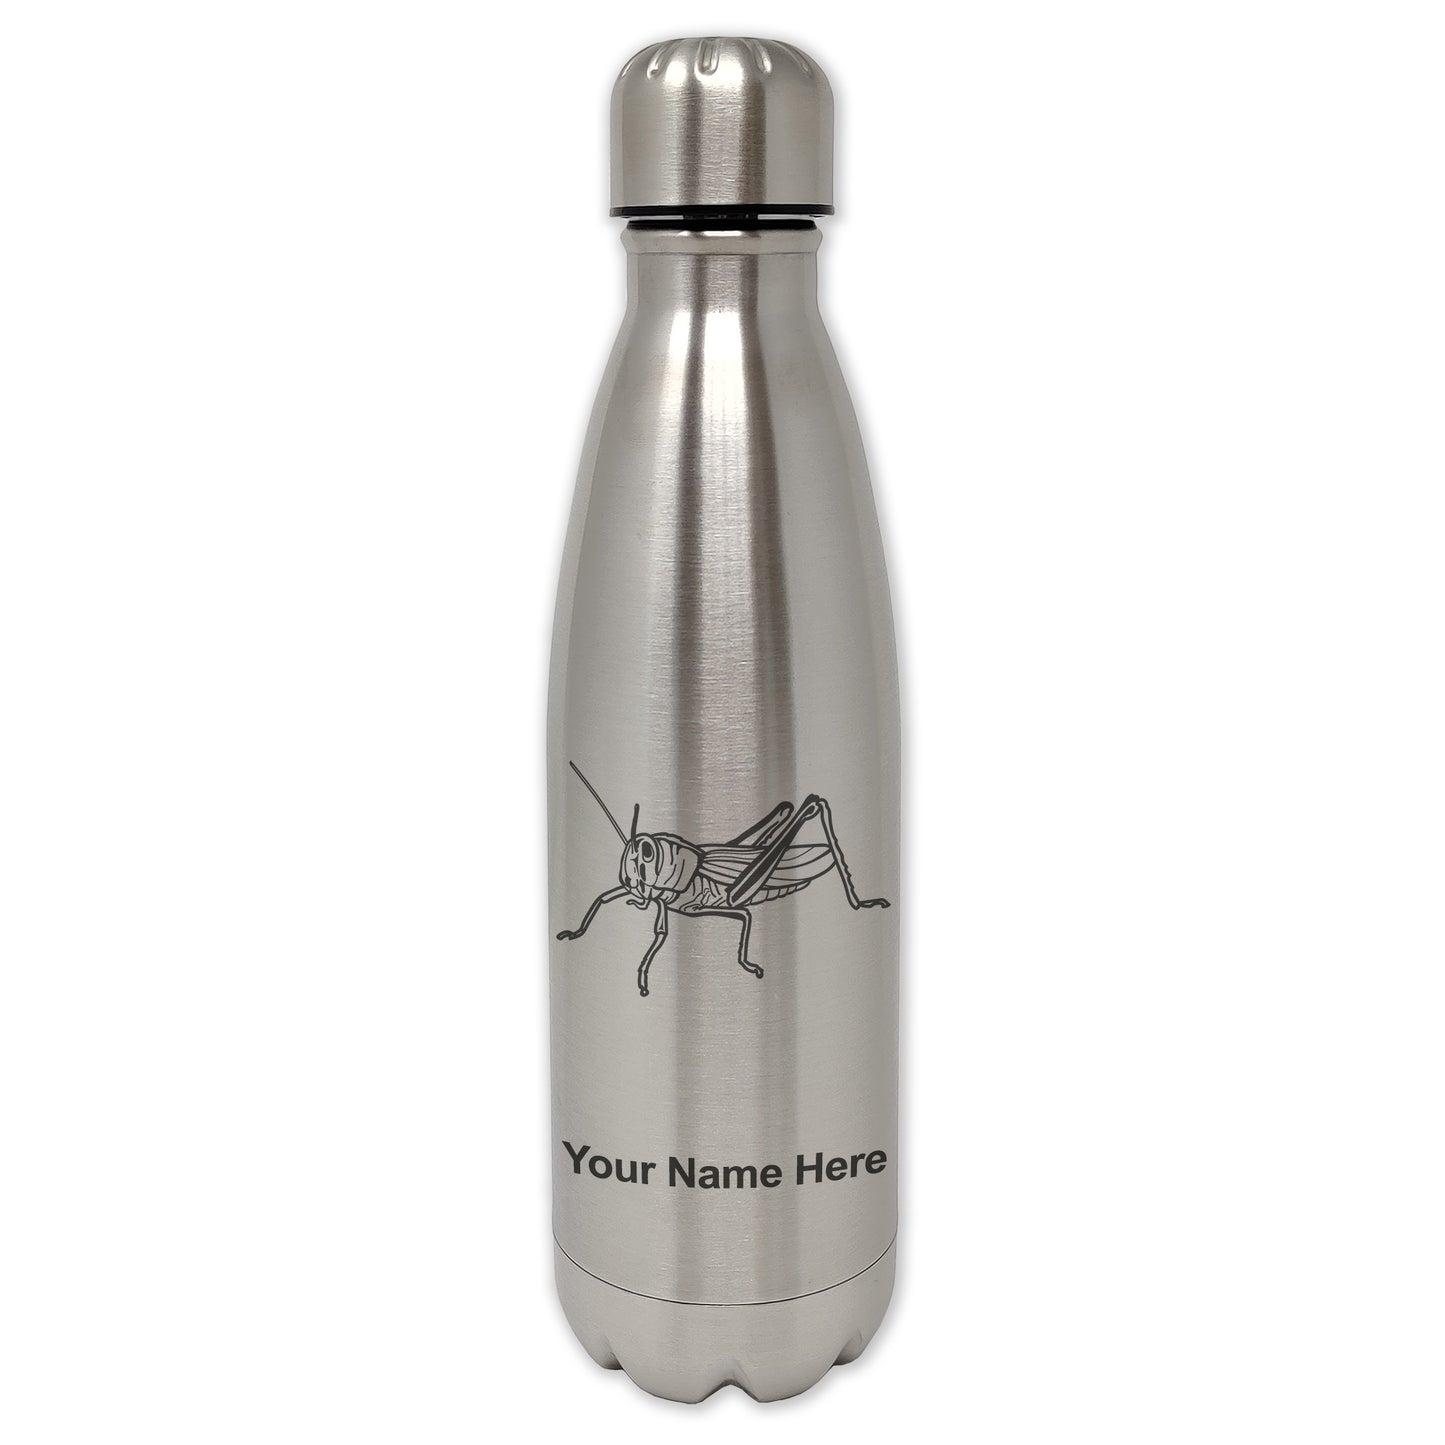 LaserGram Single Wall Water Bottle, Grasshopper, Personalized Engraving Included